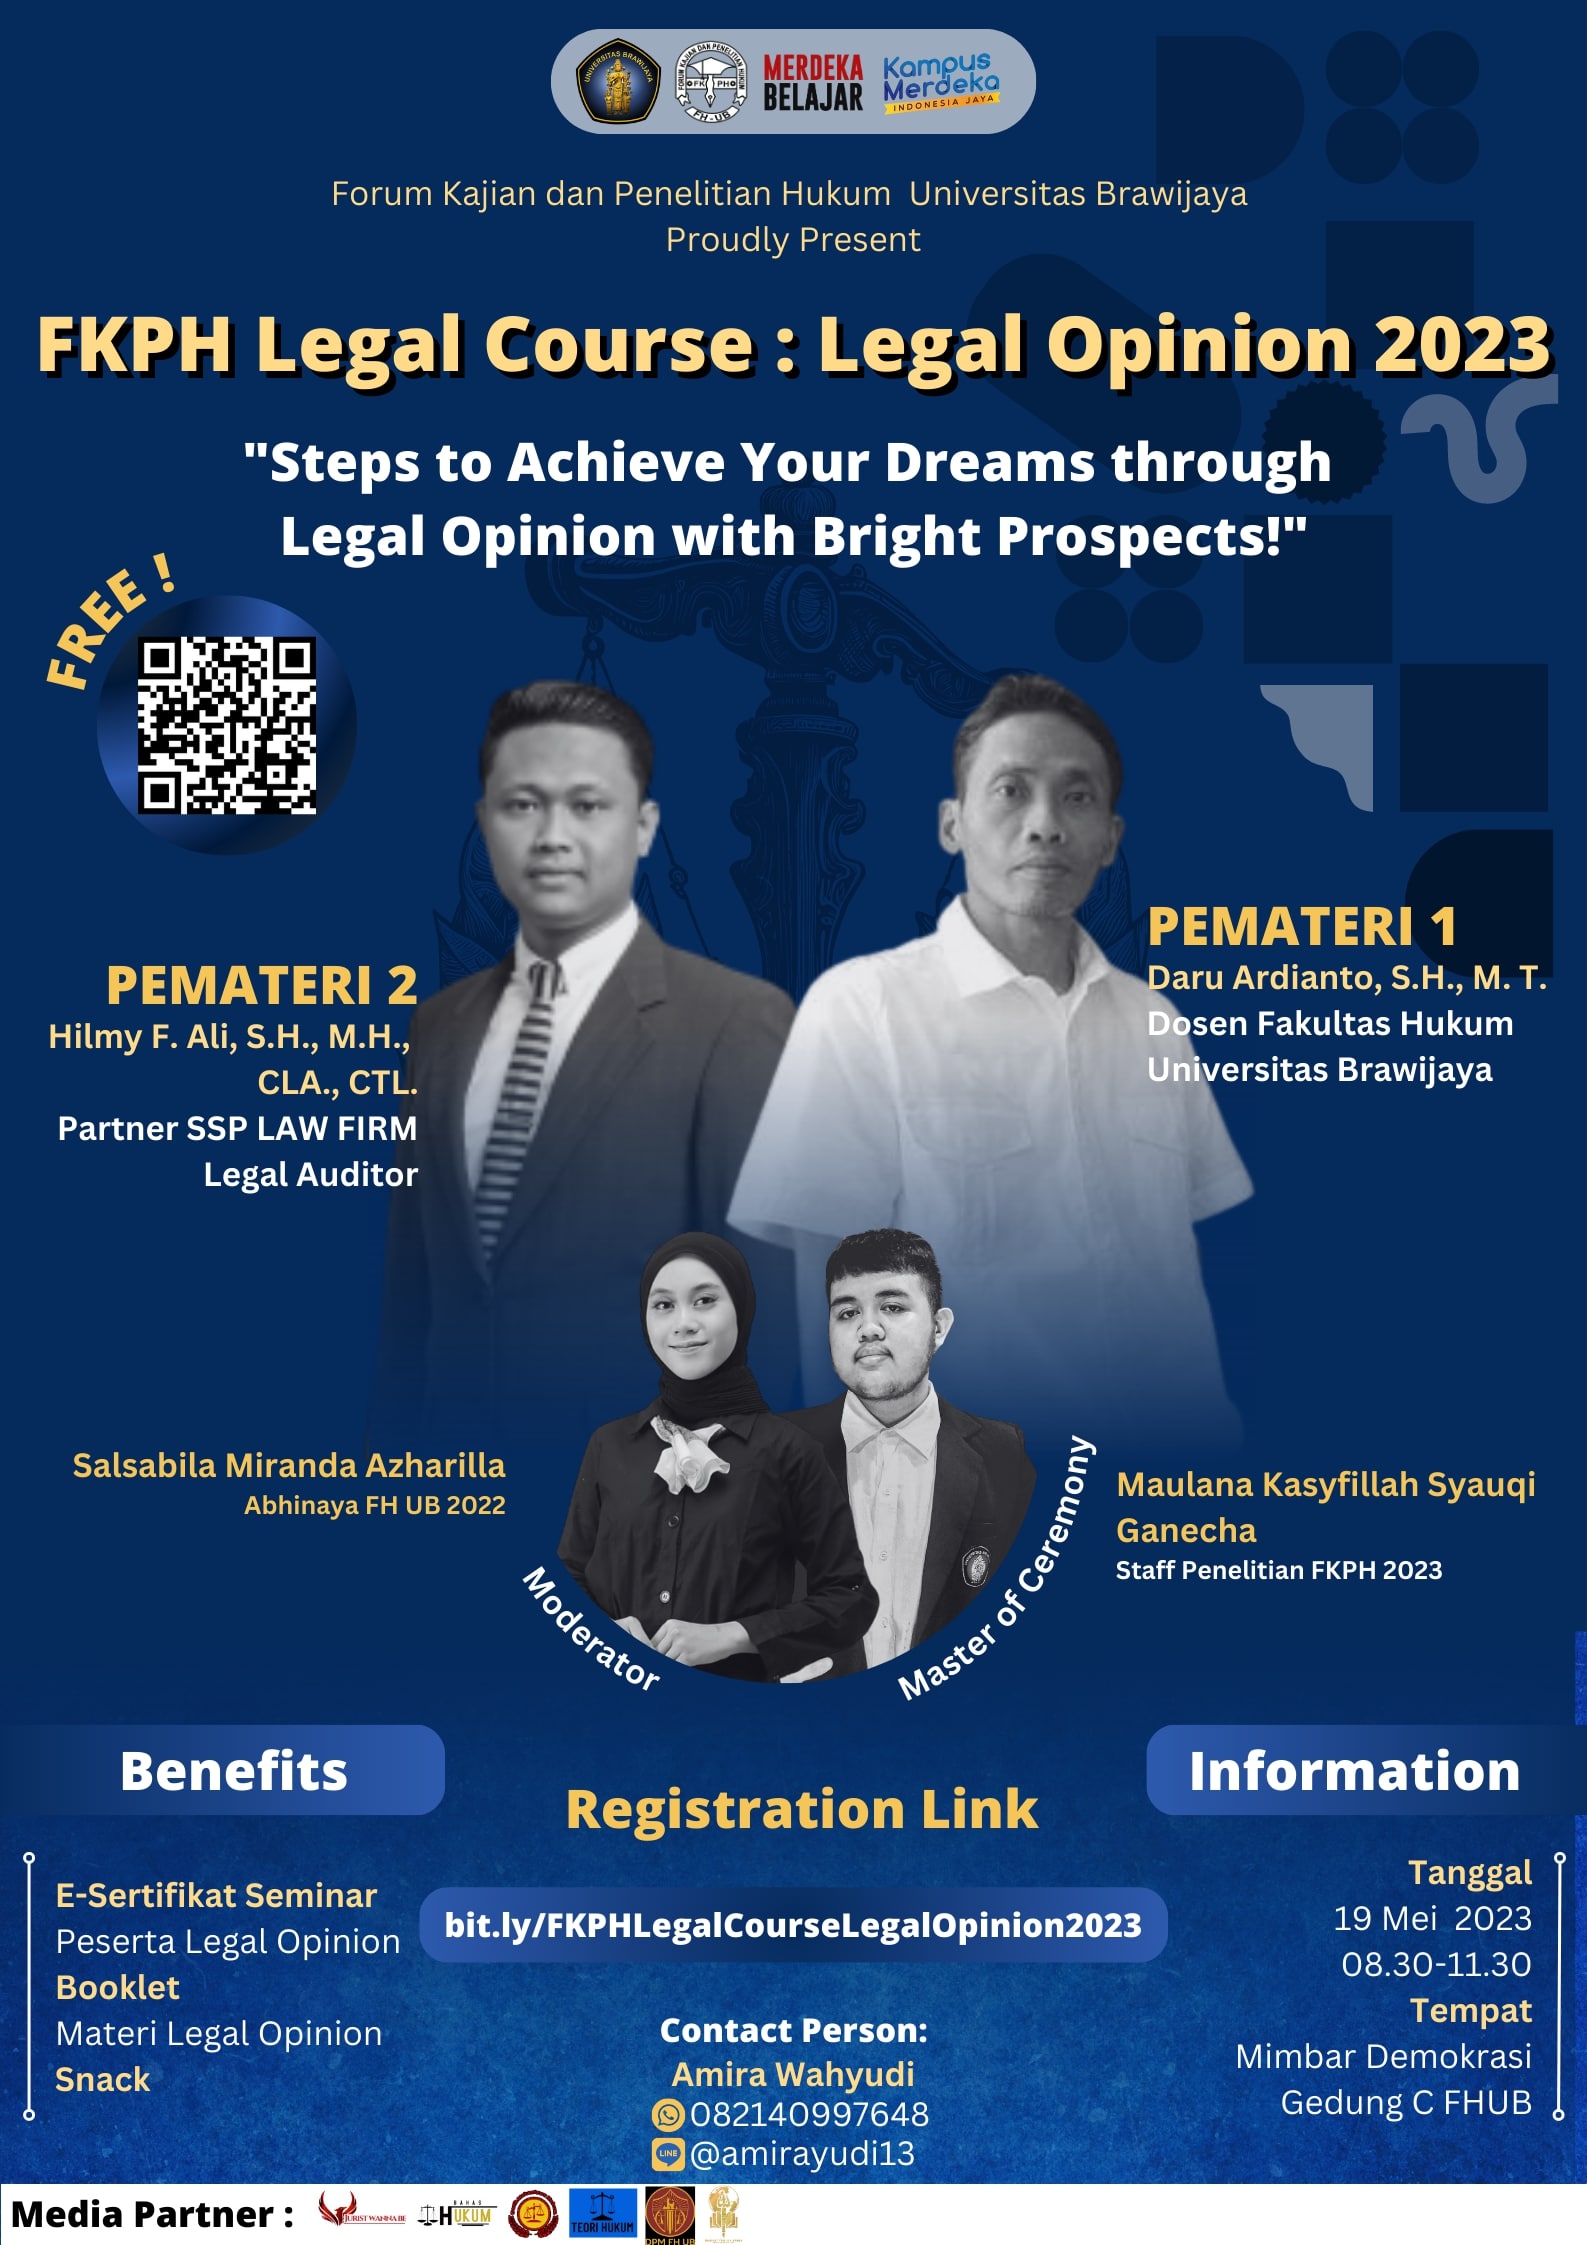 FKPH Legal Course: Legal Opinion 2023